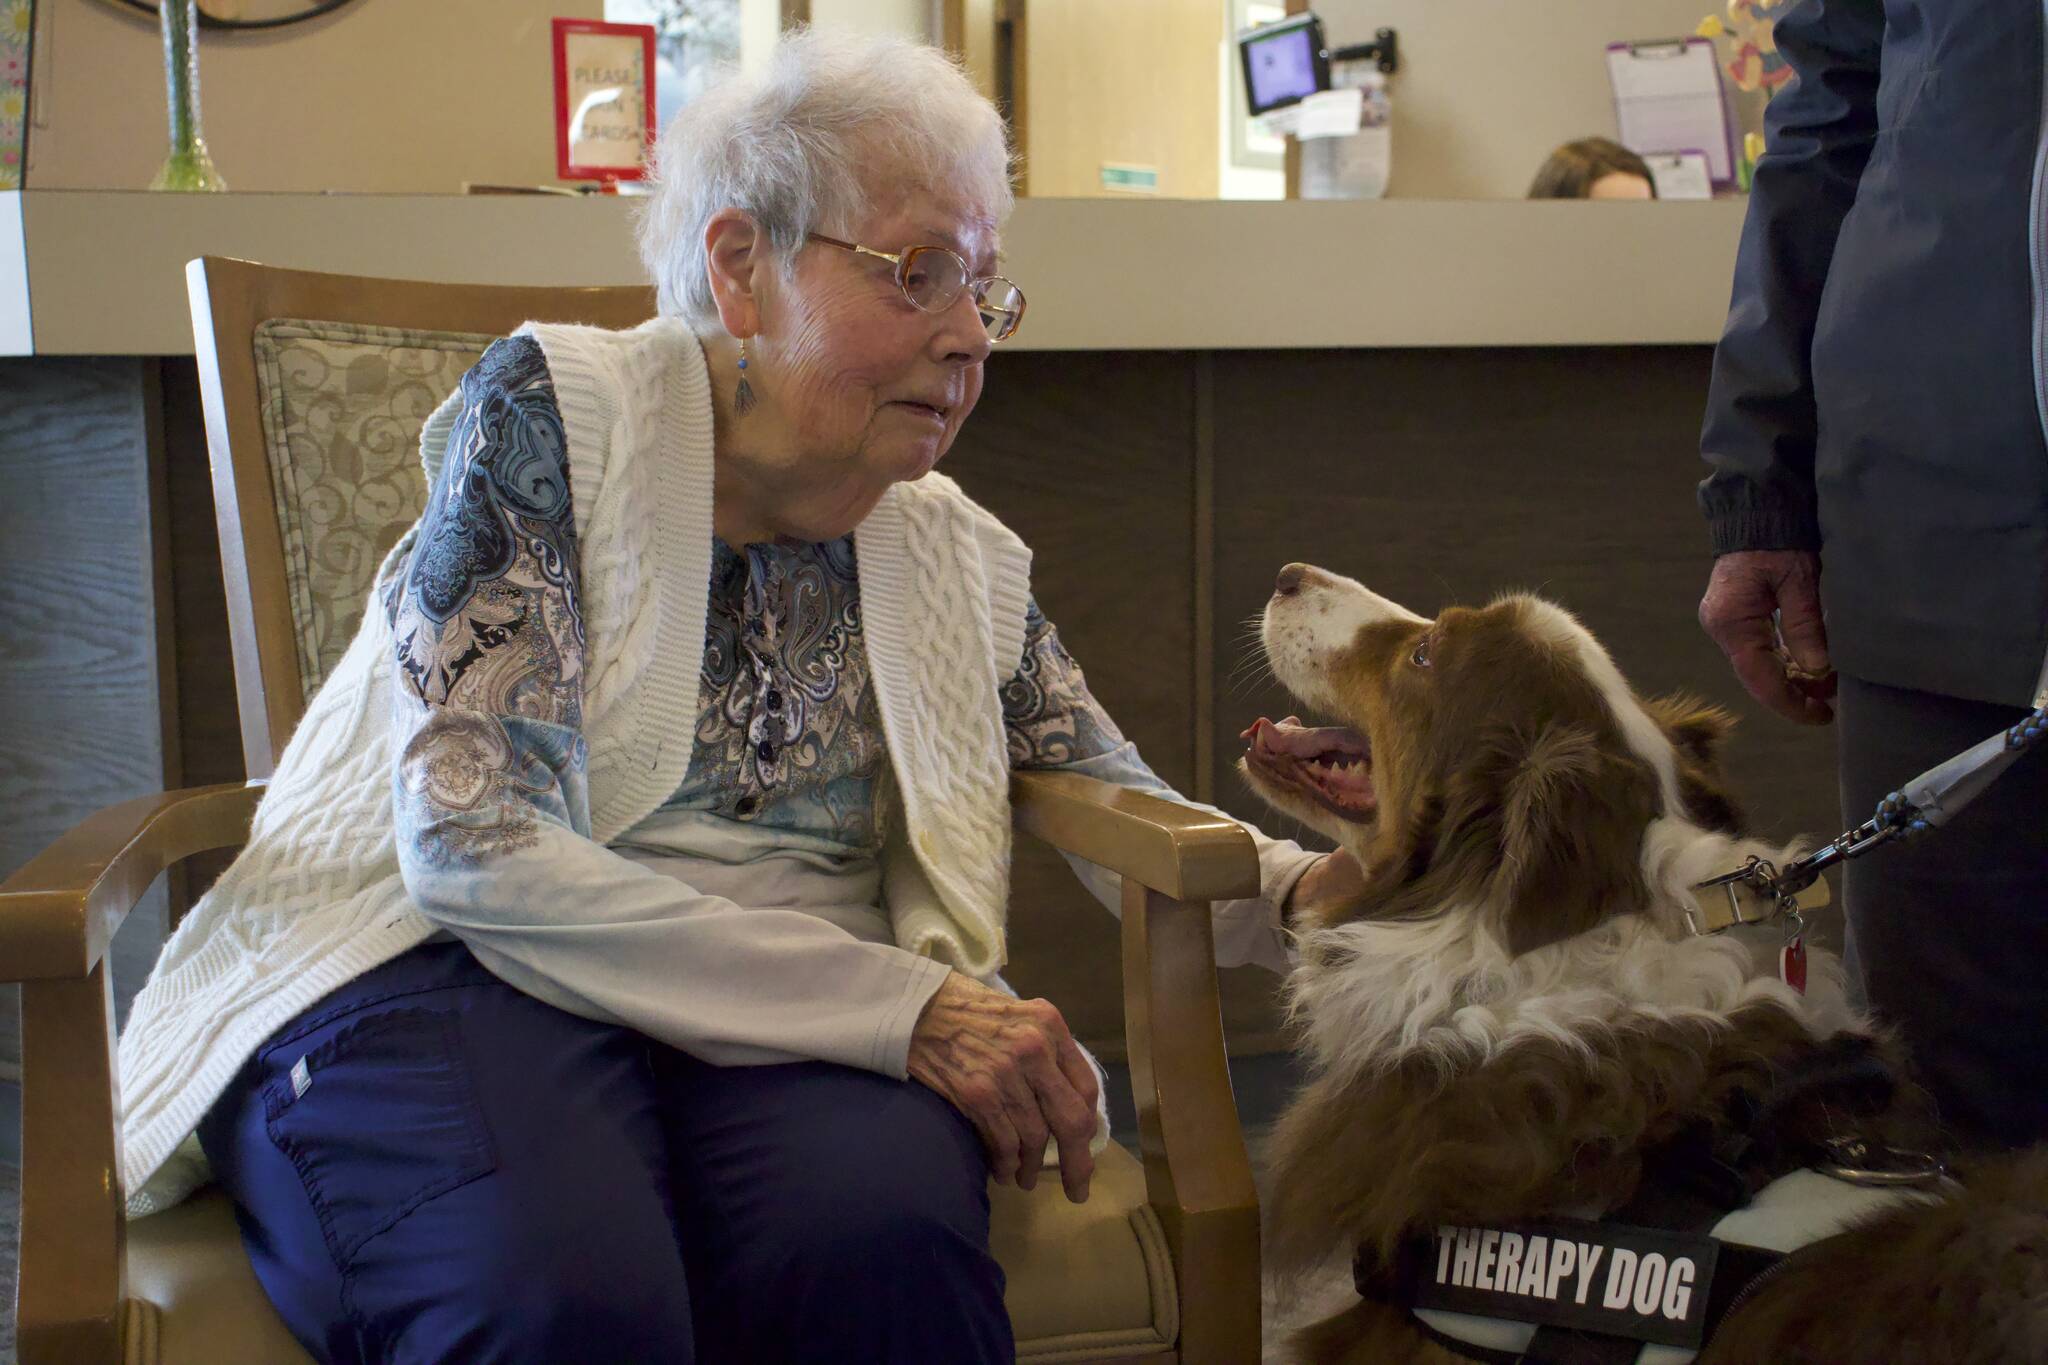 Photo by Rachel Rosen/Whidbey News-Times
Harriet Dailey, a resident at Harbor Tower Village, pets a therapy dog.